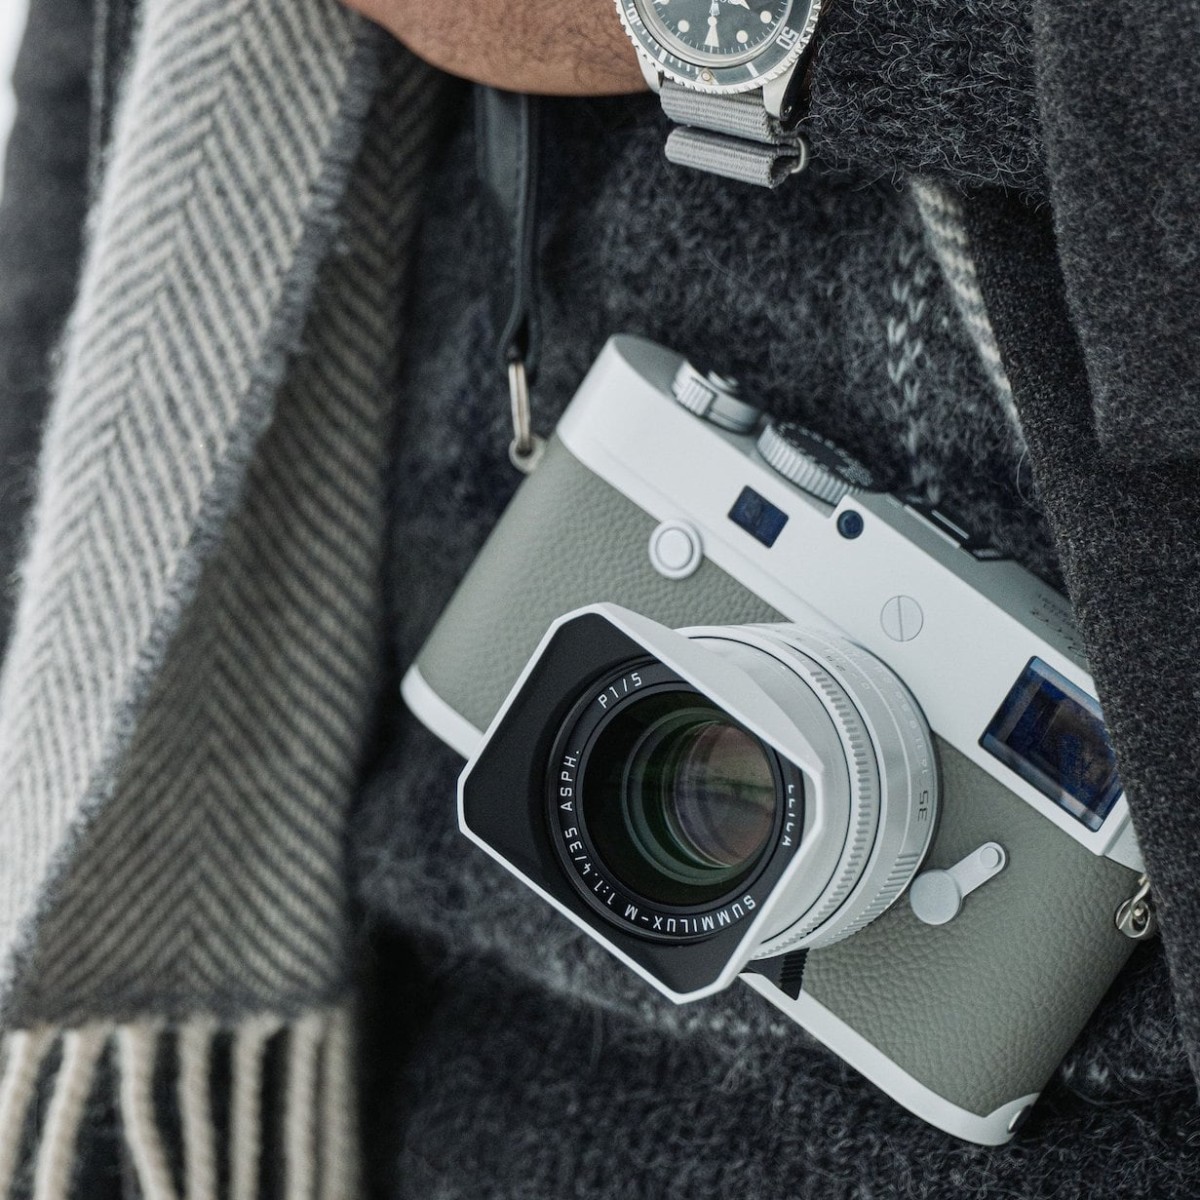 Leica M10-P Ghost Edition Timeless Camera is inspired by a faded-dial watch